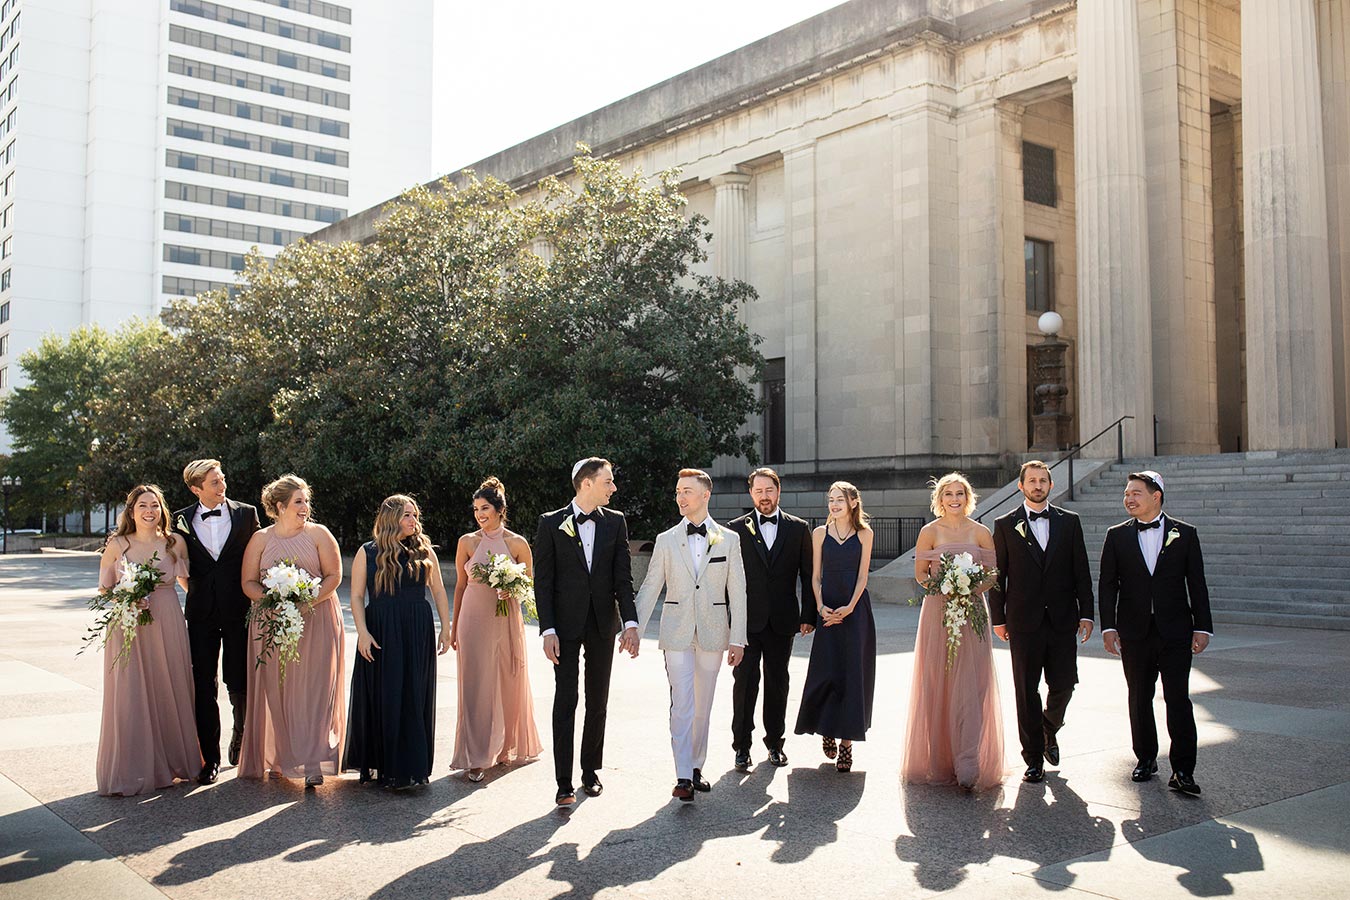 Two Grooms in Grey and Black Tuxedos | Groomsmen in Classic Tuxes and Bridesmaids in Blush Halter-Top Dresses | Wedding Party Style Inspiration | Gay Wedding in Downtown Nashville